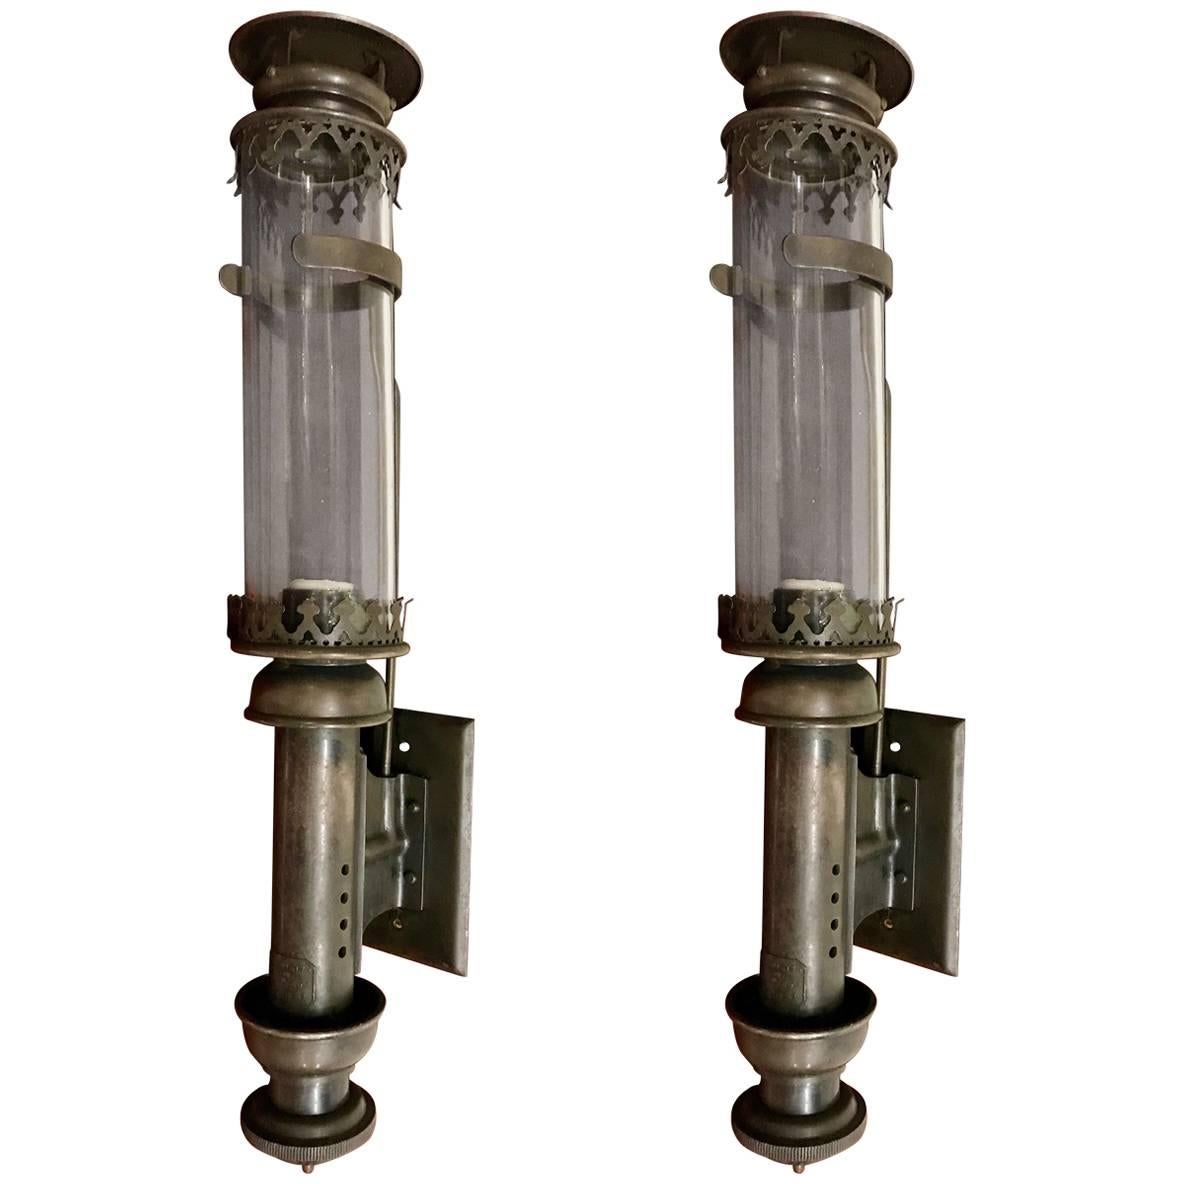 Pair of Tole Bright & Co. Stage Coach Lamps, Now Electrified